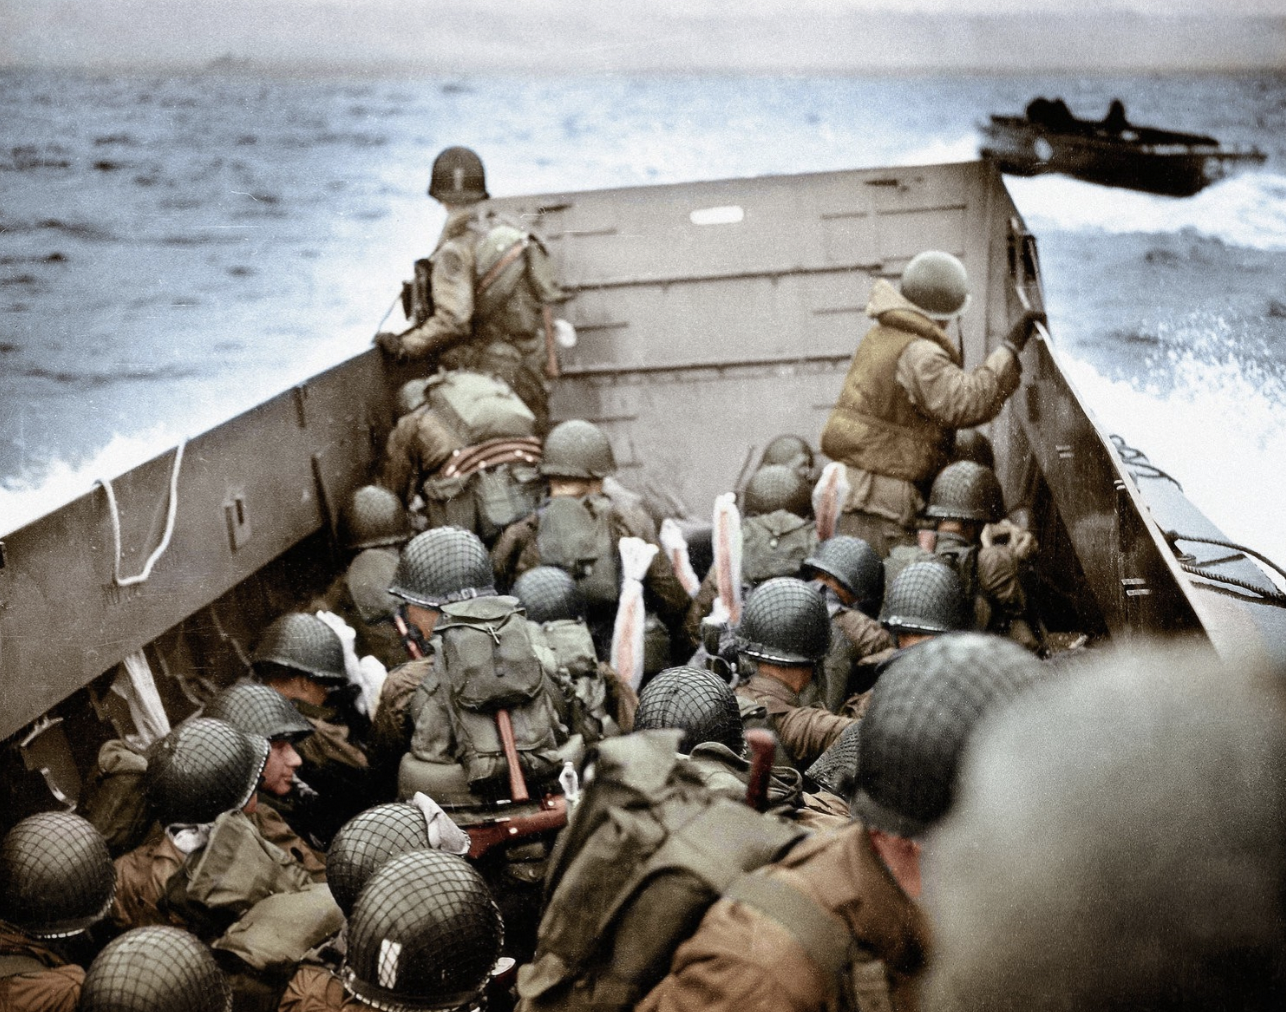 Some of the first American Troops in Higgins boats approaching Omaha Beach.